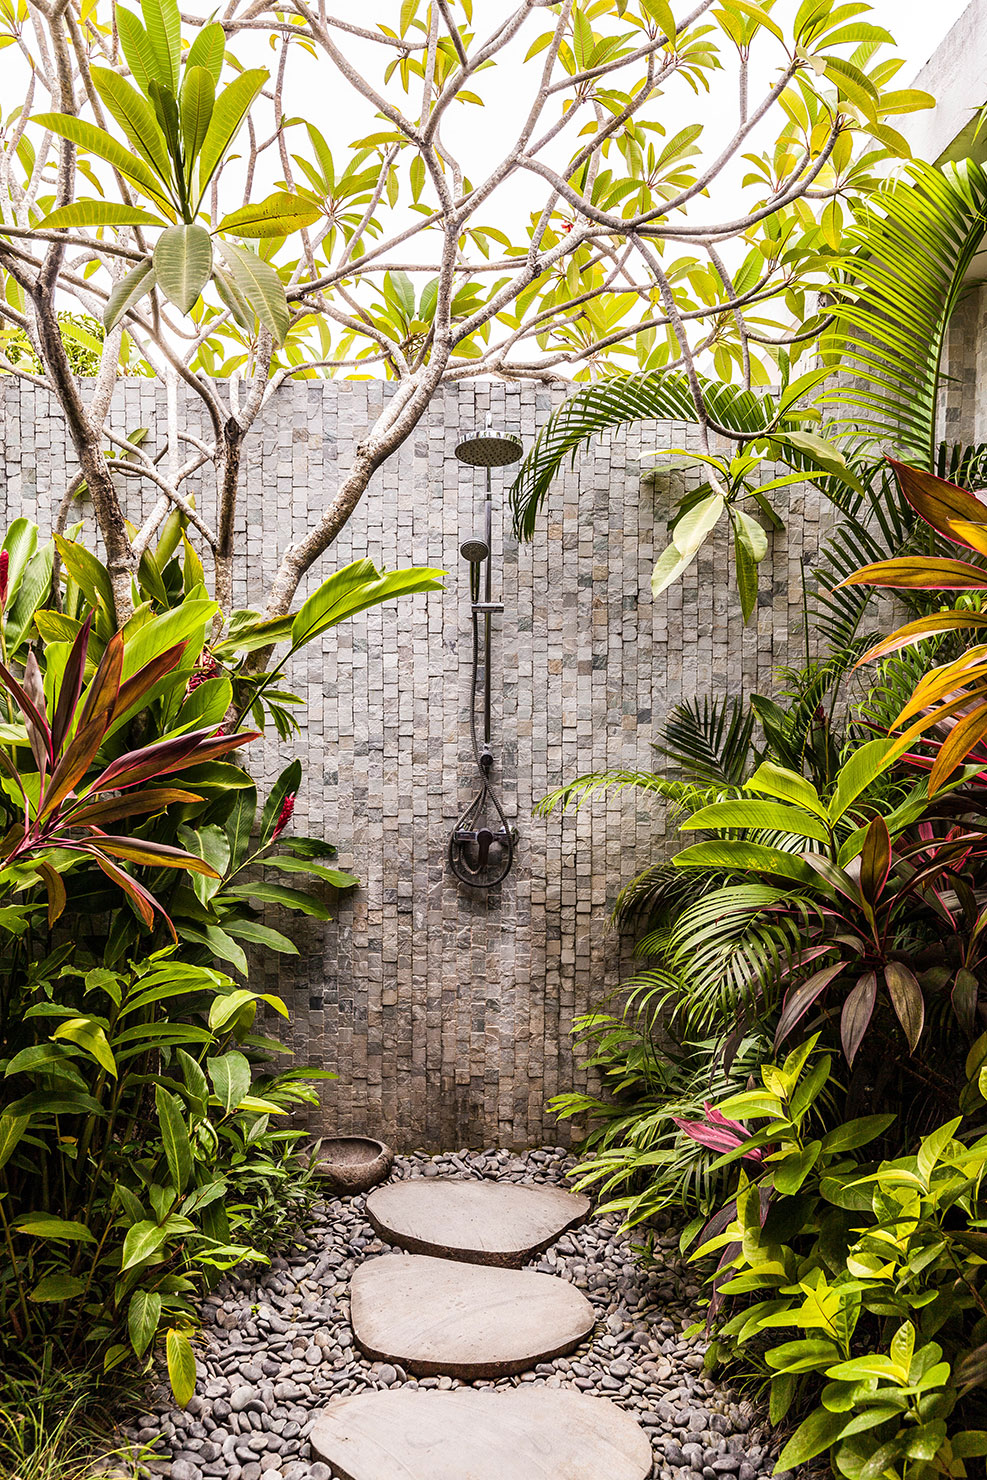 This "sea shanty" in Bali not only takes the shower outside, but brings you to the jungle. #backyard inspiration via www.L-2-Design.com